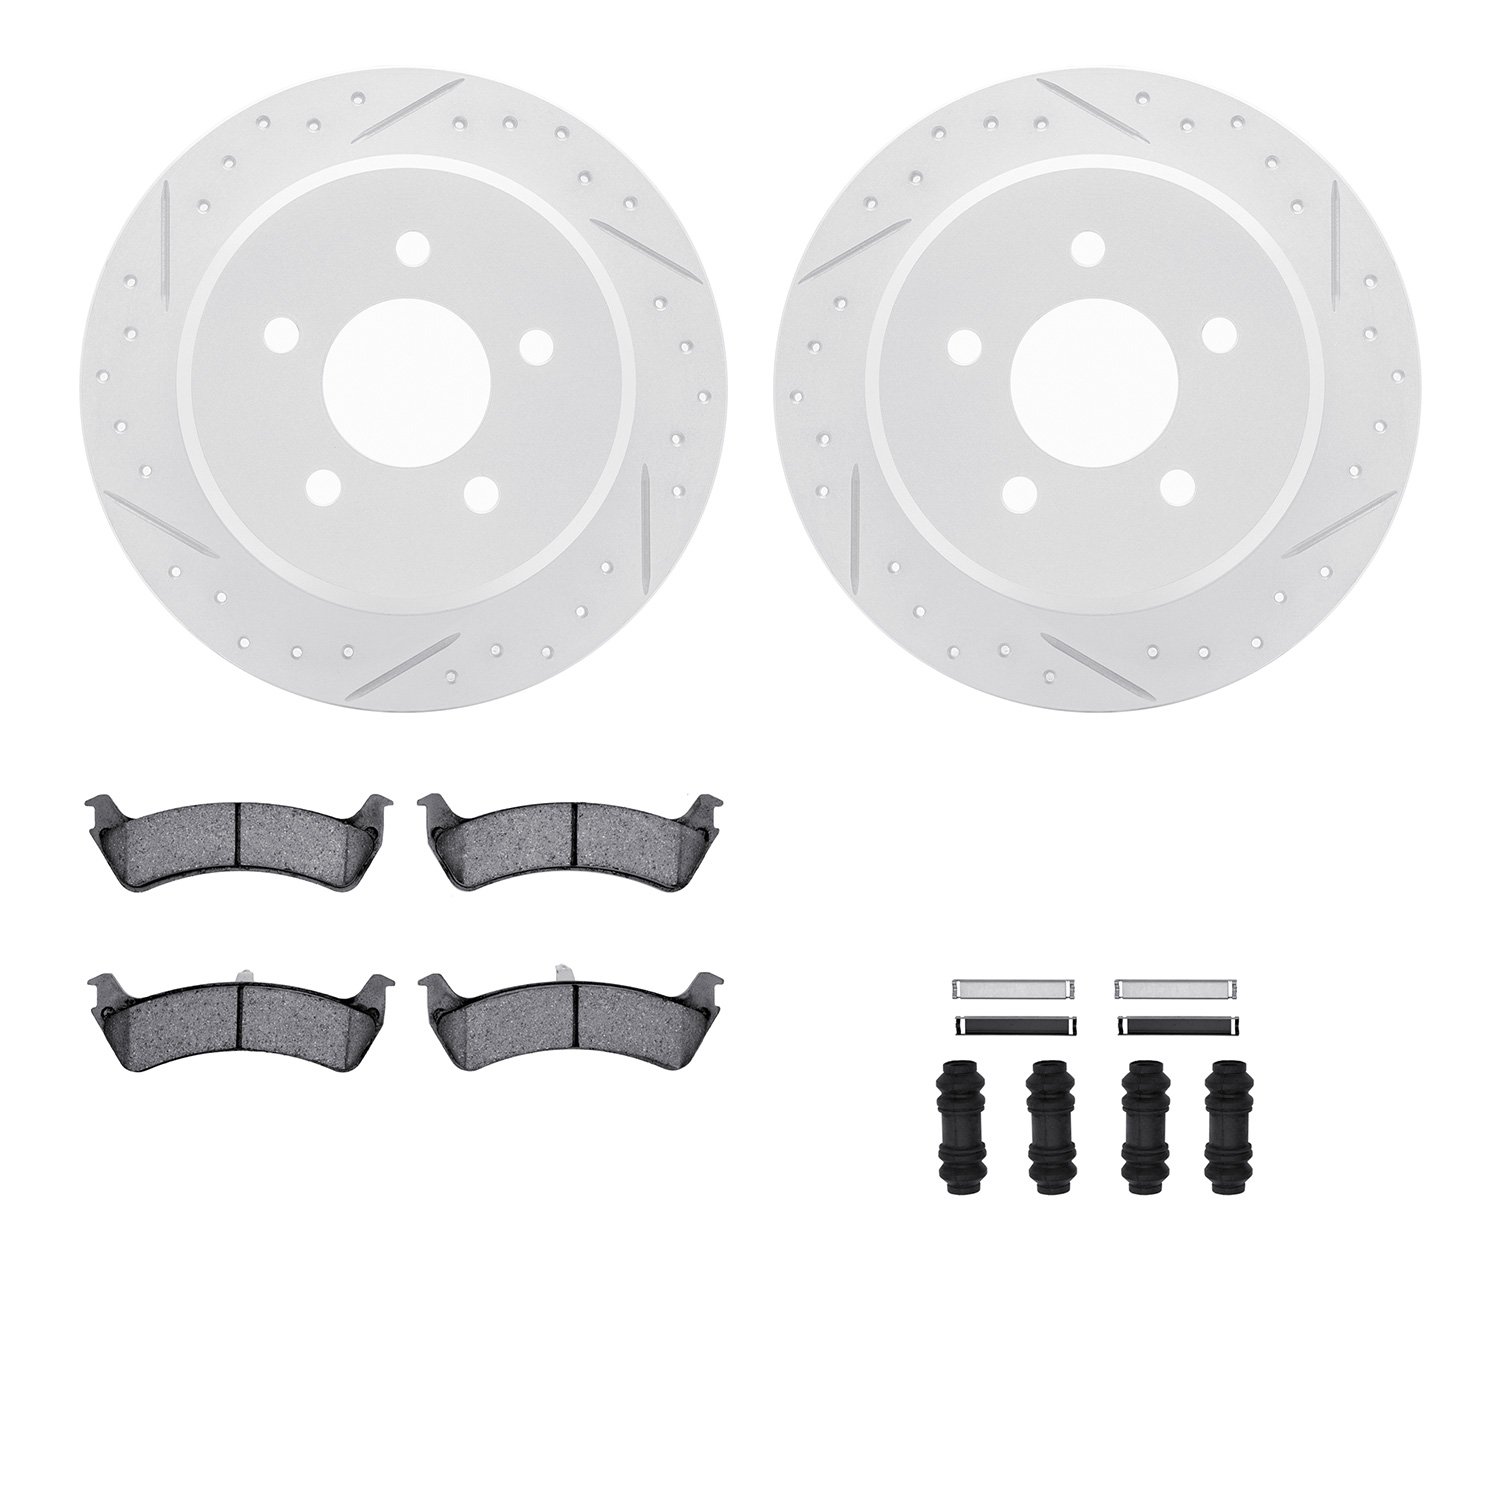 2212-99089 Geoperformance Drilled/Slotted Rotors w/Heavy-Duty Pads Kit & Hardware, 1995-2002 Ford/Lincoln/Mercury/Mazda, Positio